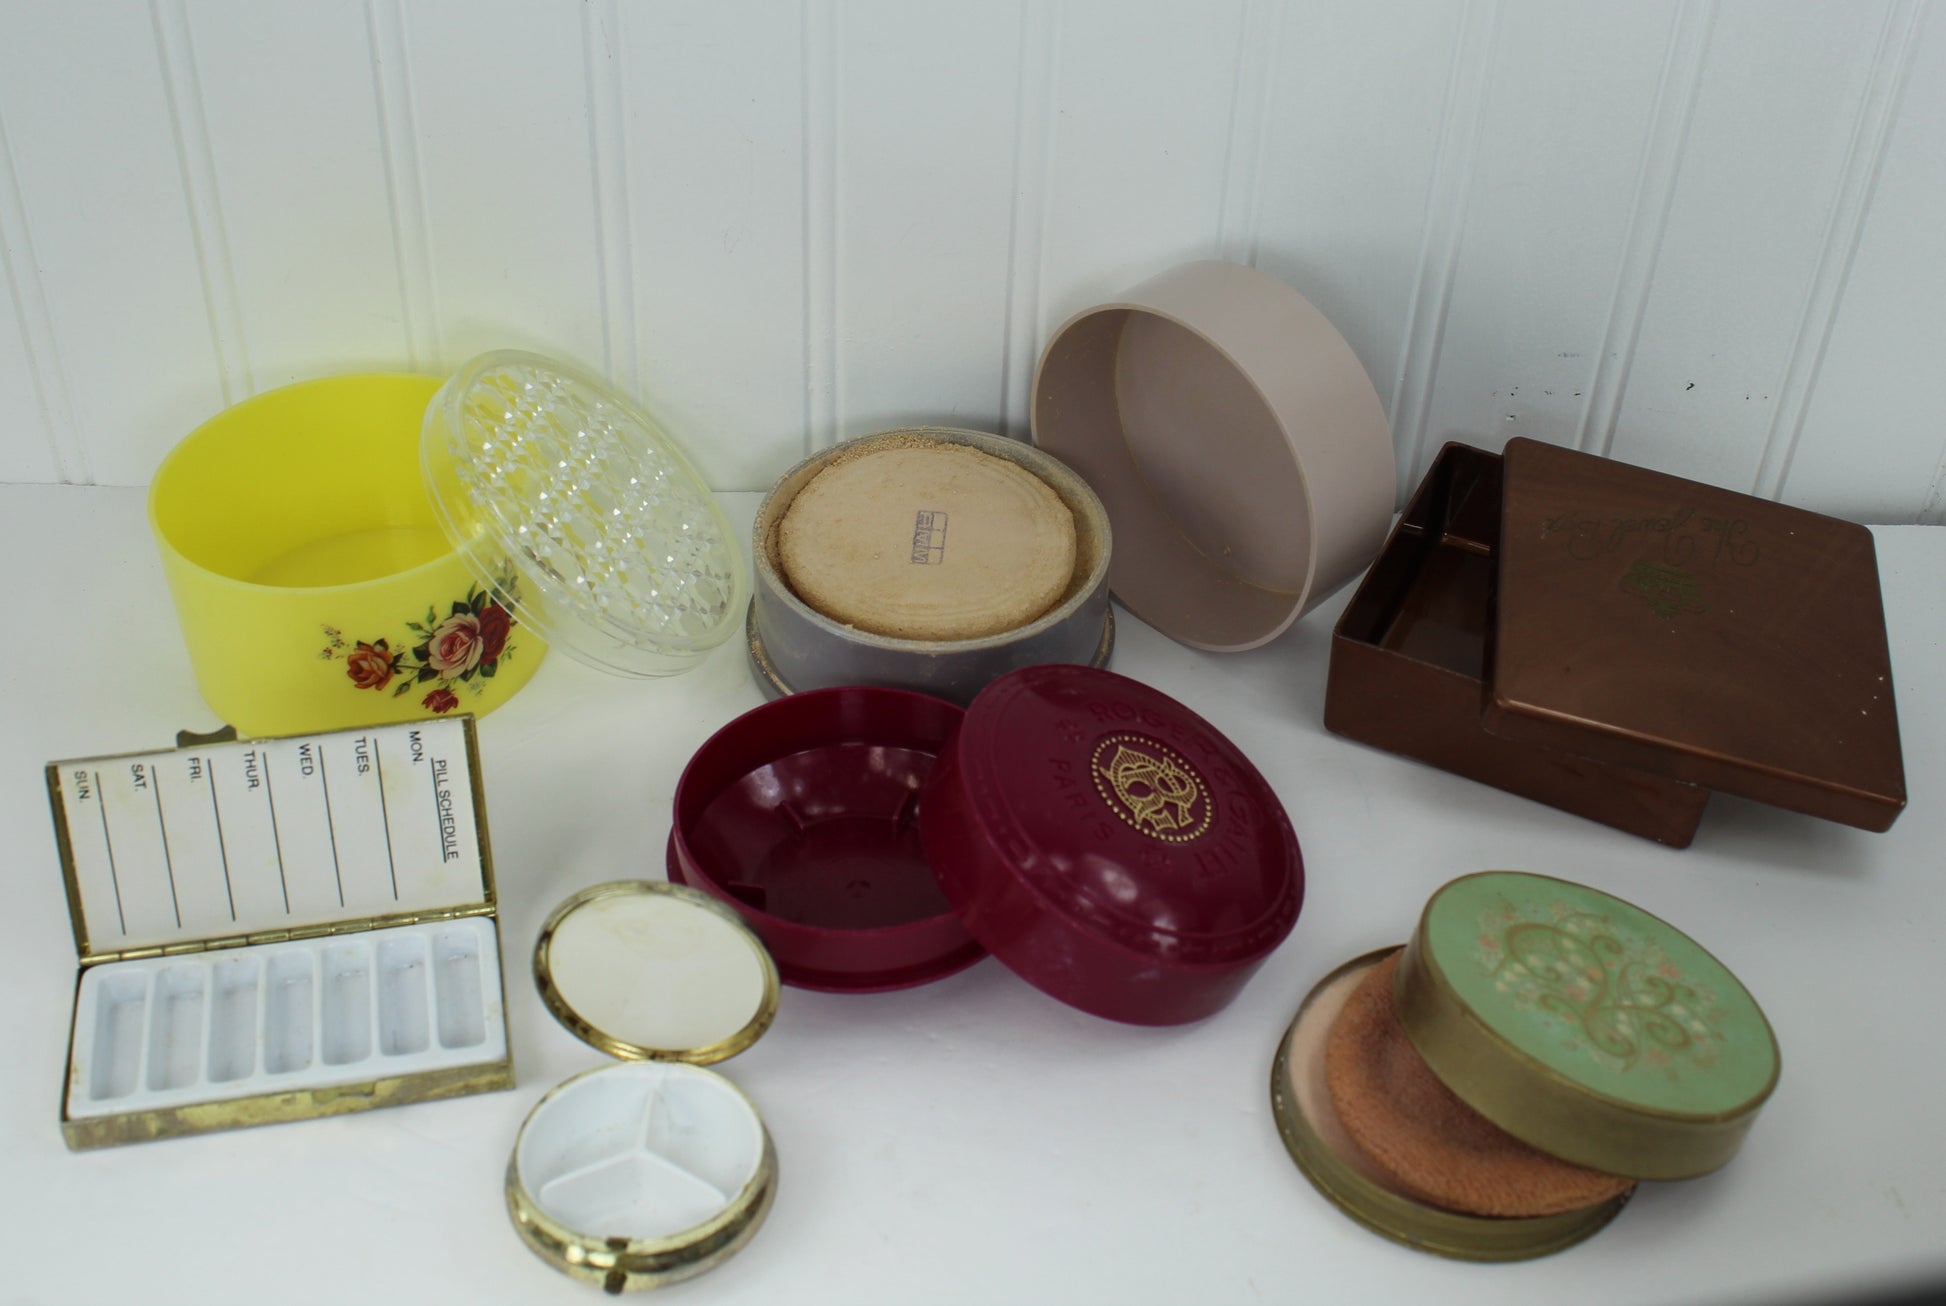 Collection Vintage 10 Vanity Compact Powder Jars Pill Boxes Mid Century & 1940s avon crystalline